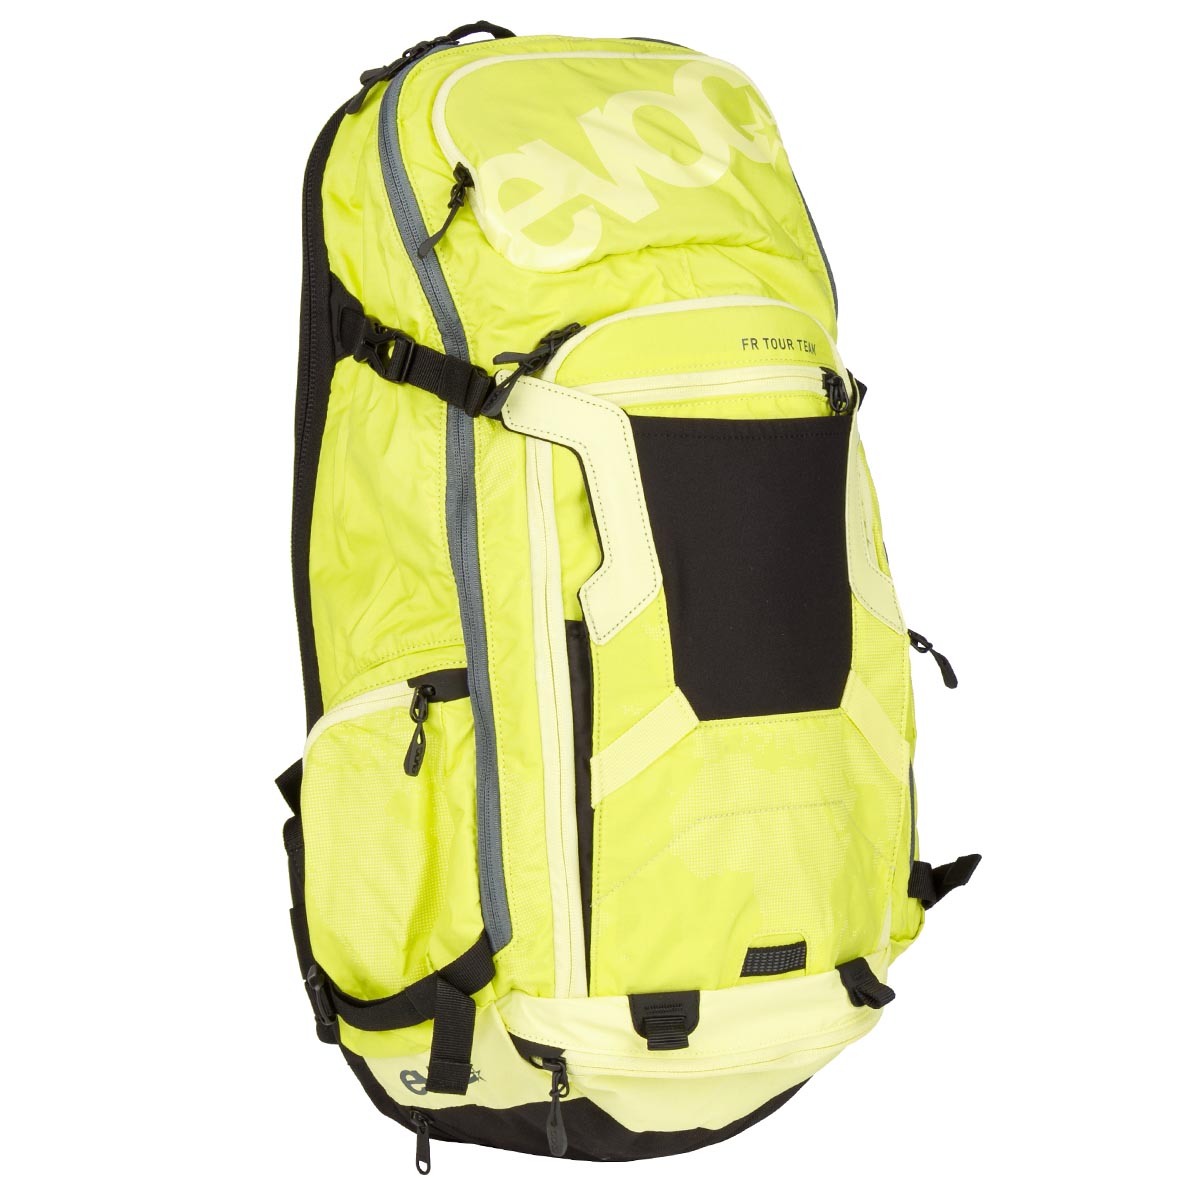 Evoc Backpack with Hydration System Compartment FR Tour Team 30 Liter Sulphur Yellow